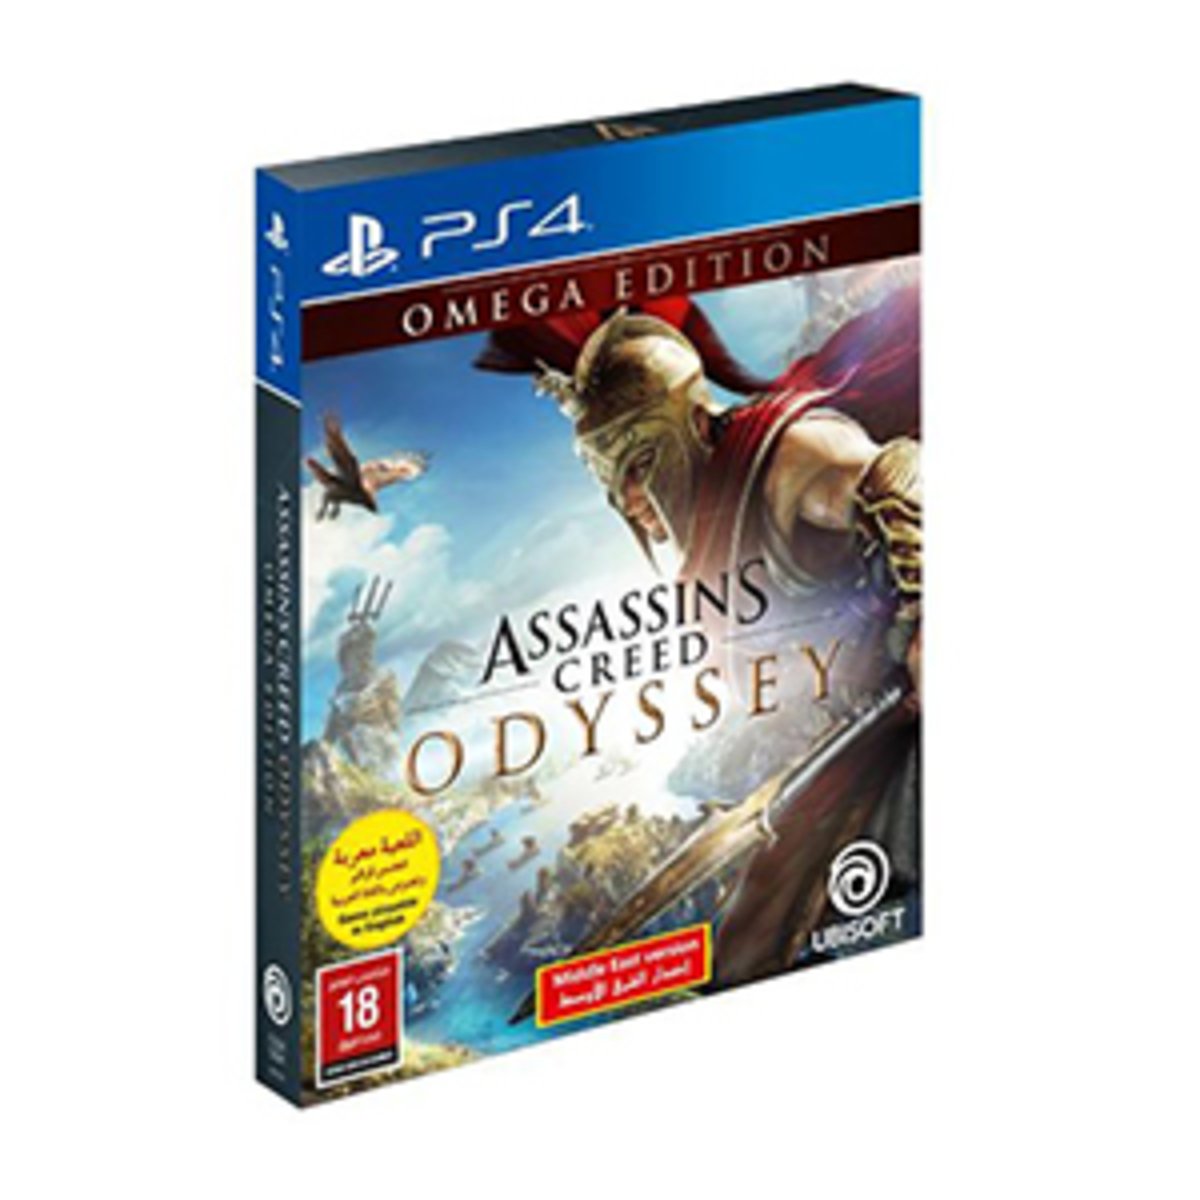 PS4 Assassins Creed Odyssey Omega Edition